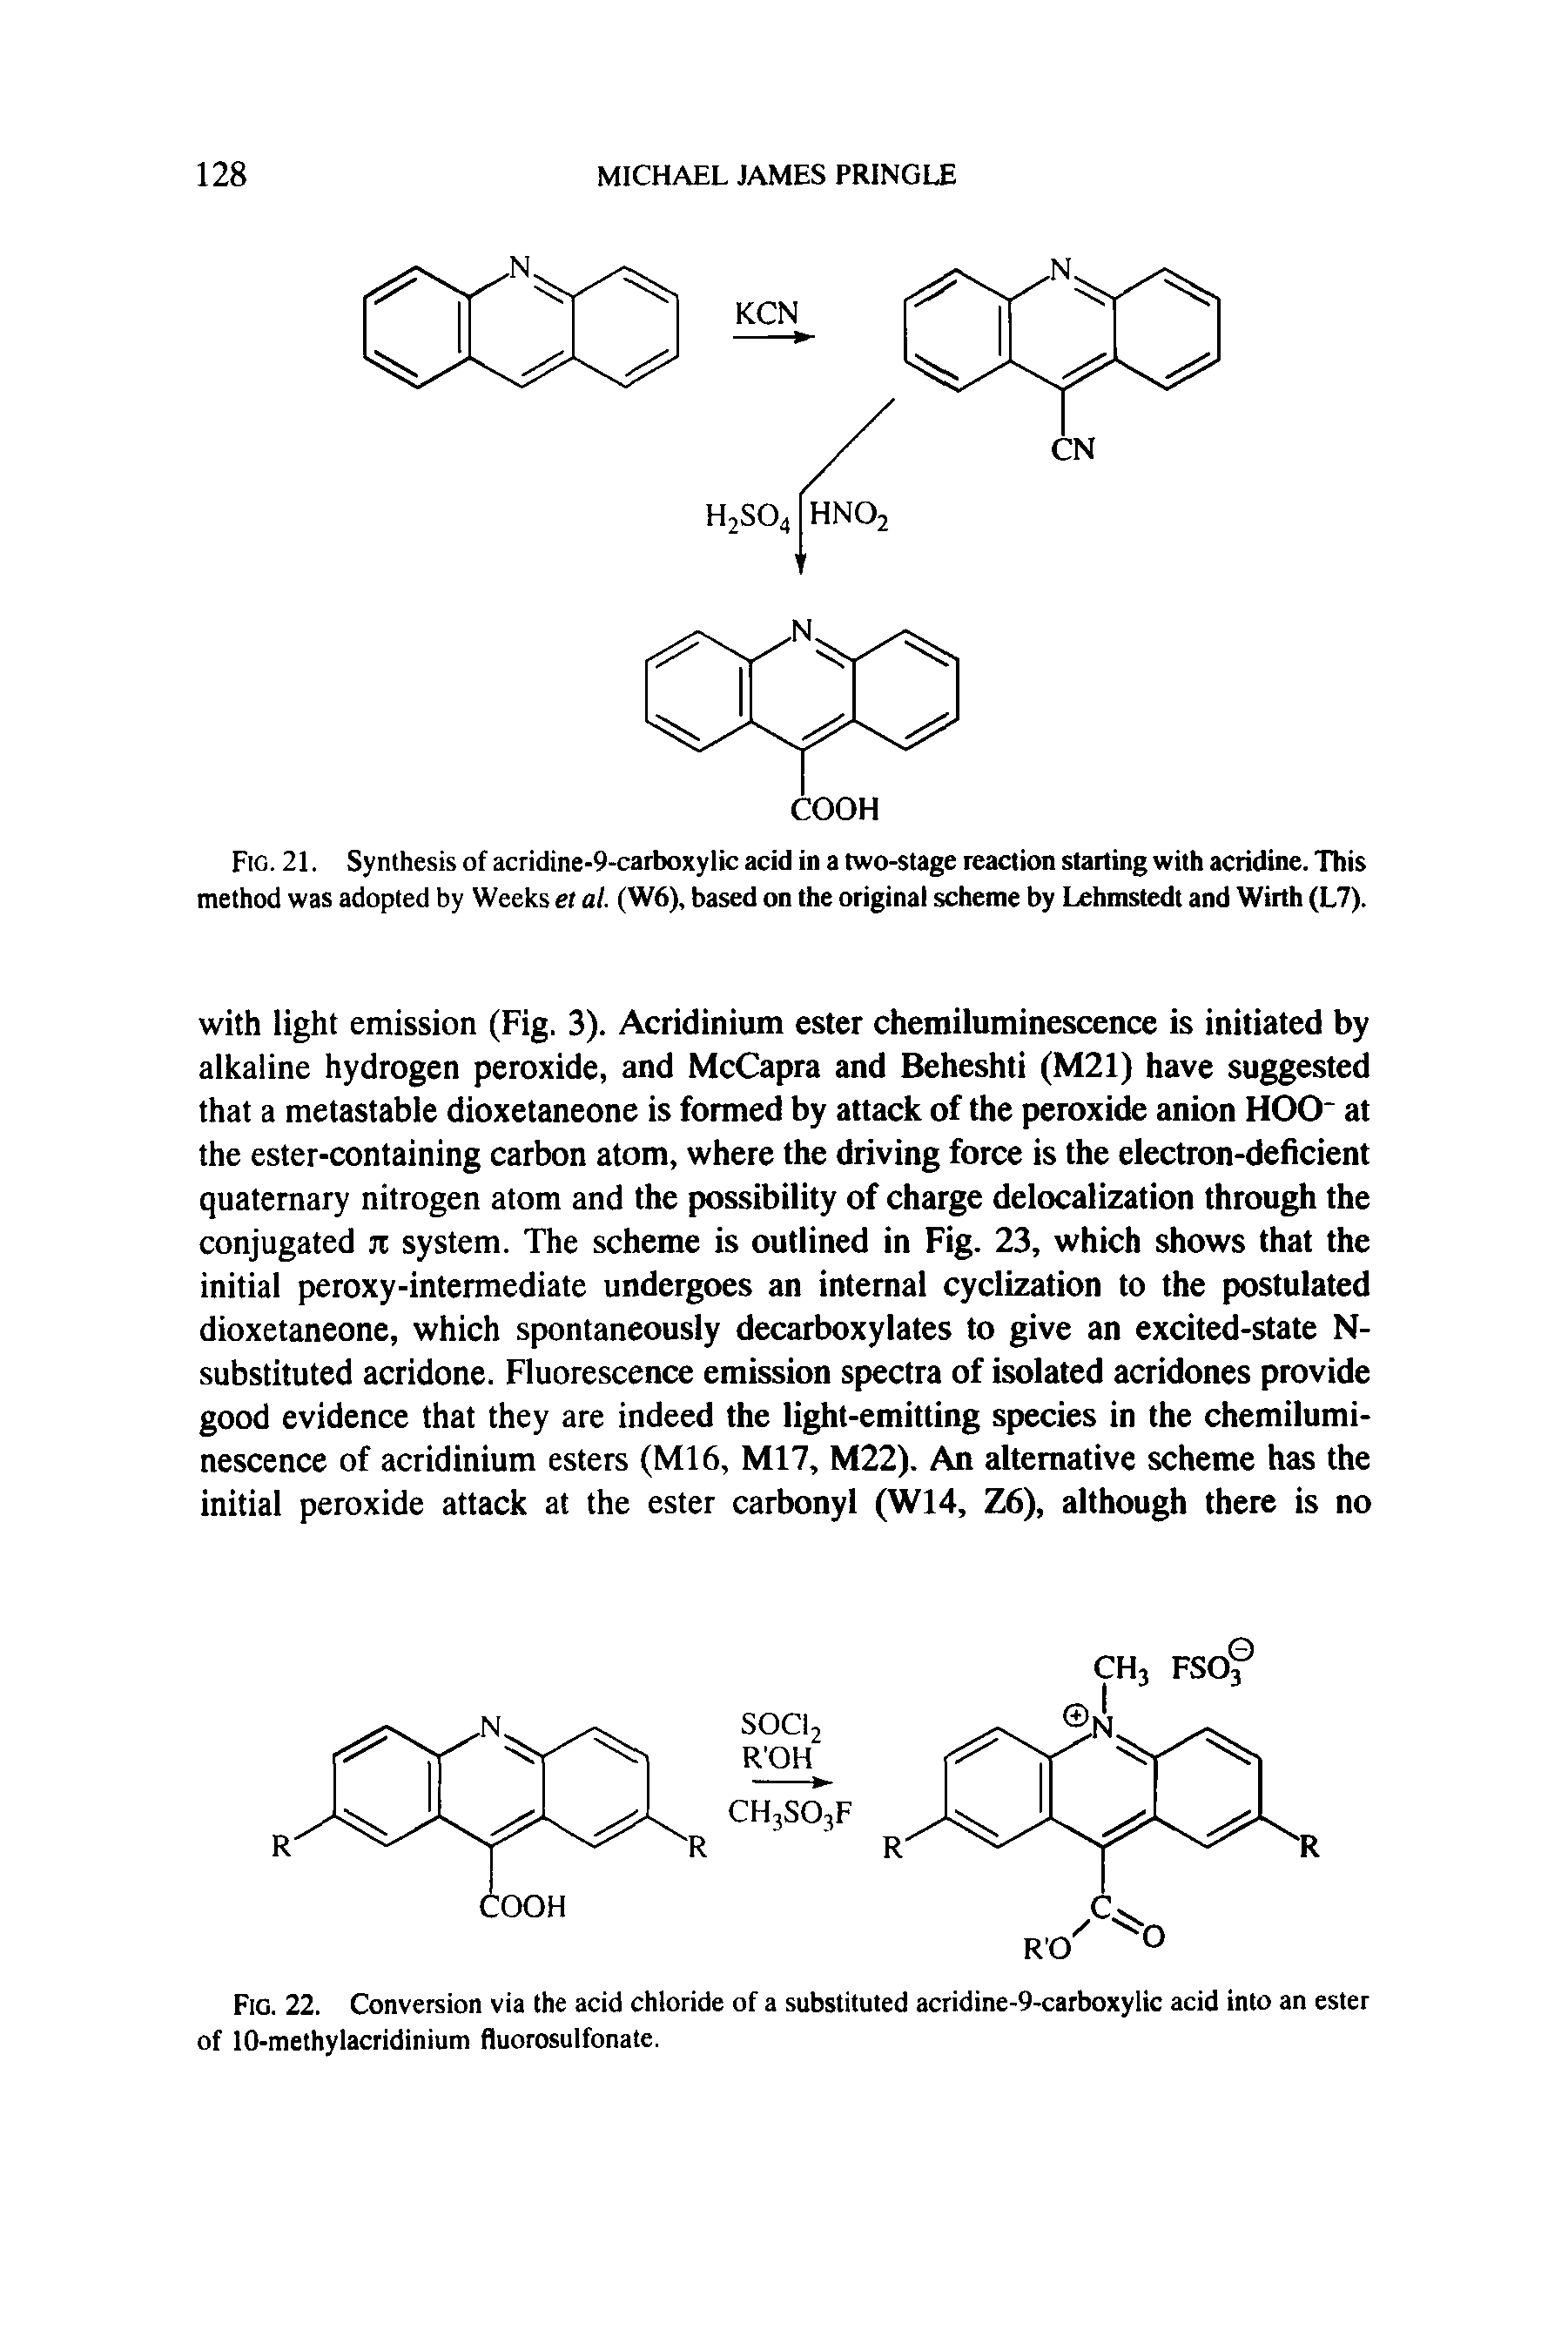 Fig. 21. Synthesis of acridine-9-carboxylic acid in a two-stage reaction starting with acridine. This method was adopted by Weeks et at. (W6), based on the original scheme by Lehmstedt and Wirth (L7).